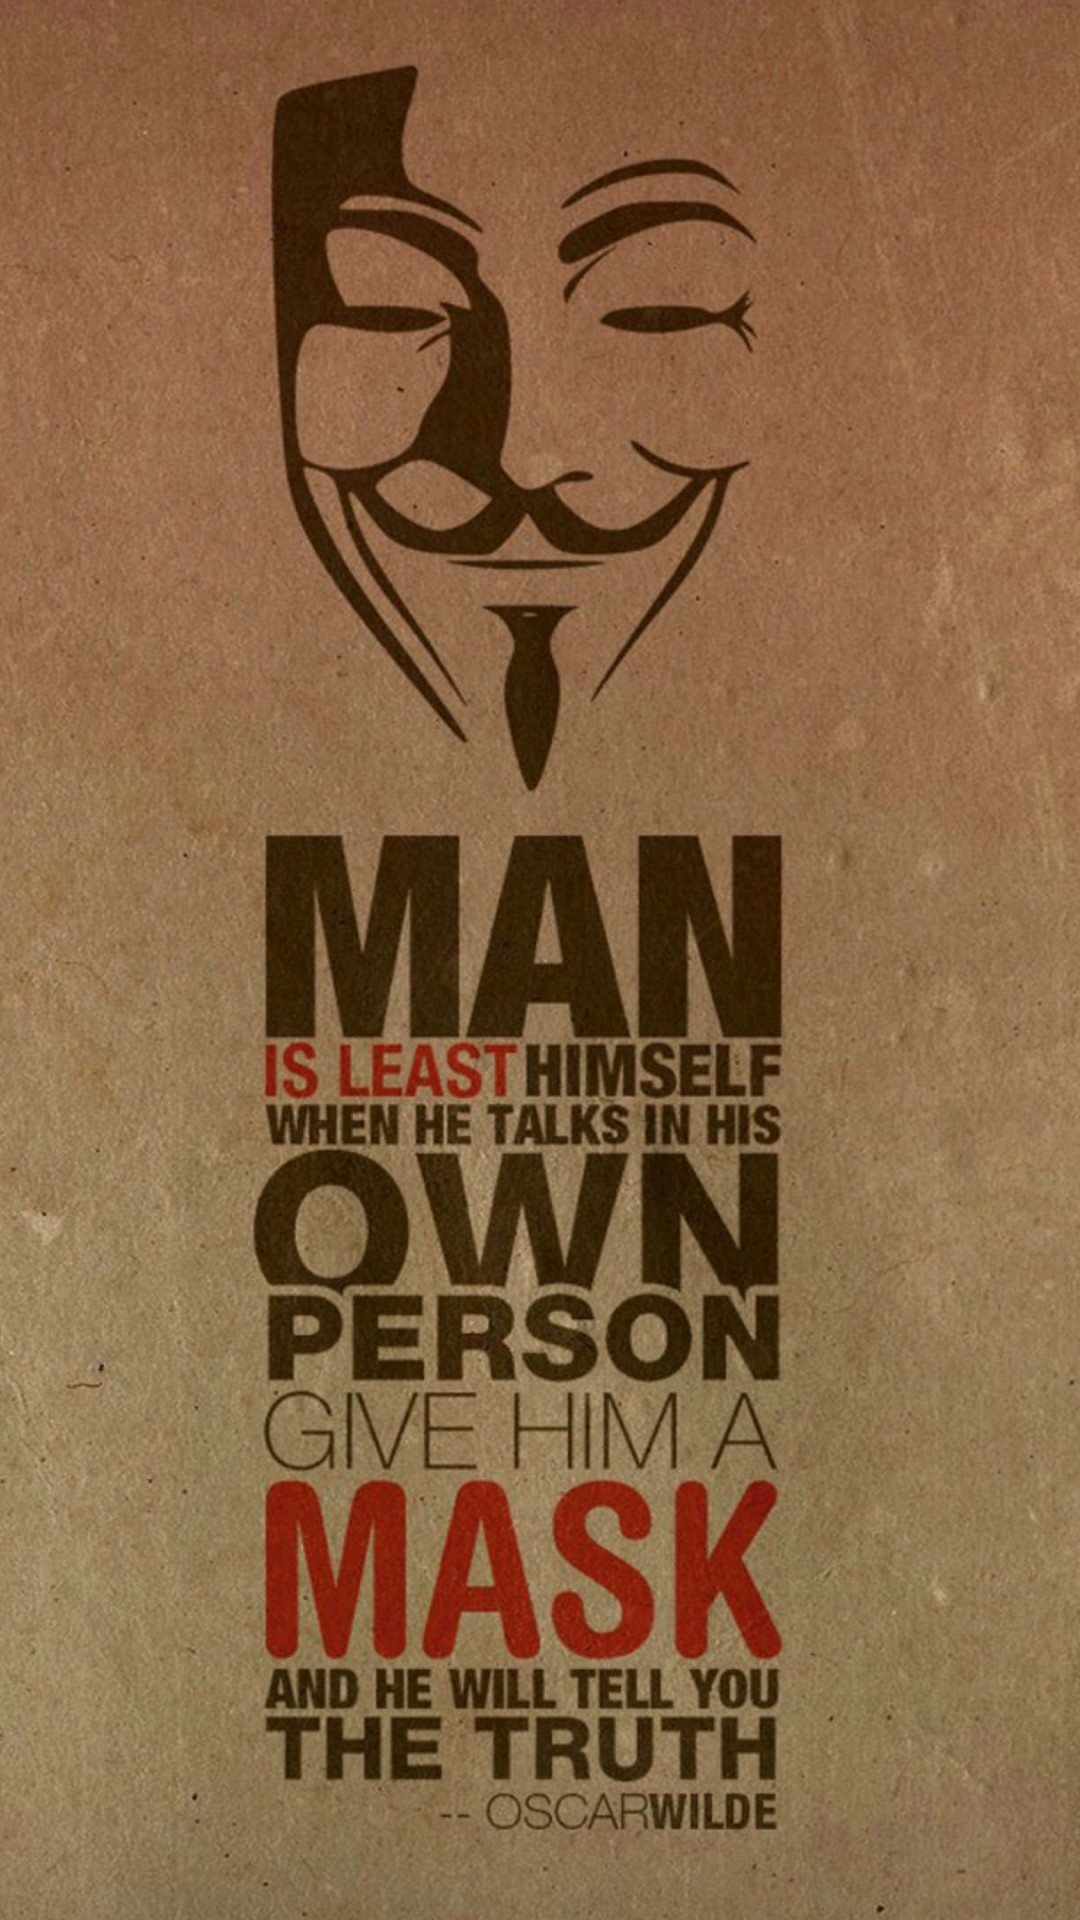 Anonymous Oscar Wilde Quote Wallpaper for HTC One